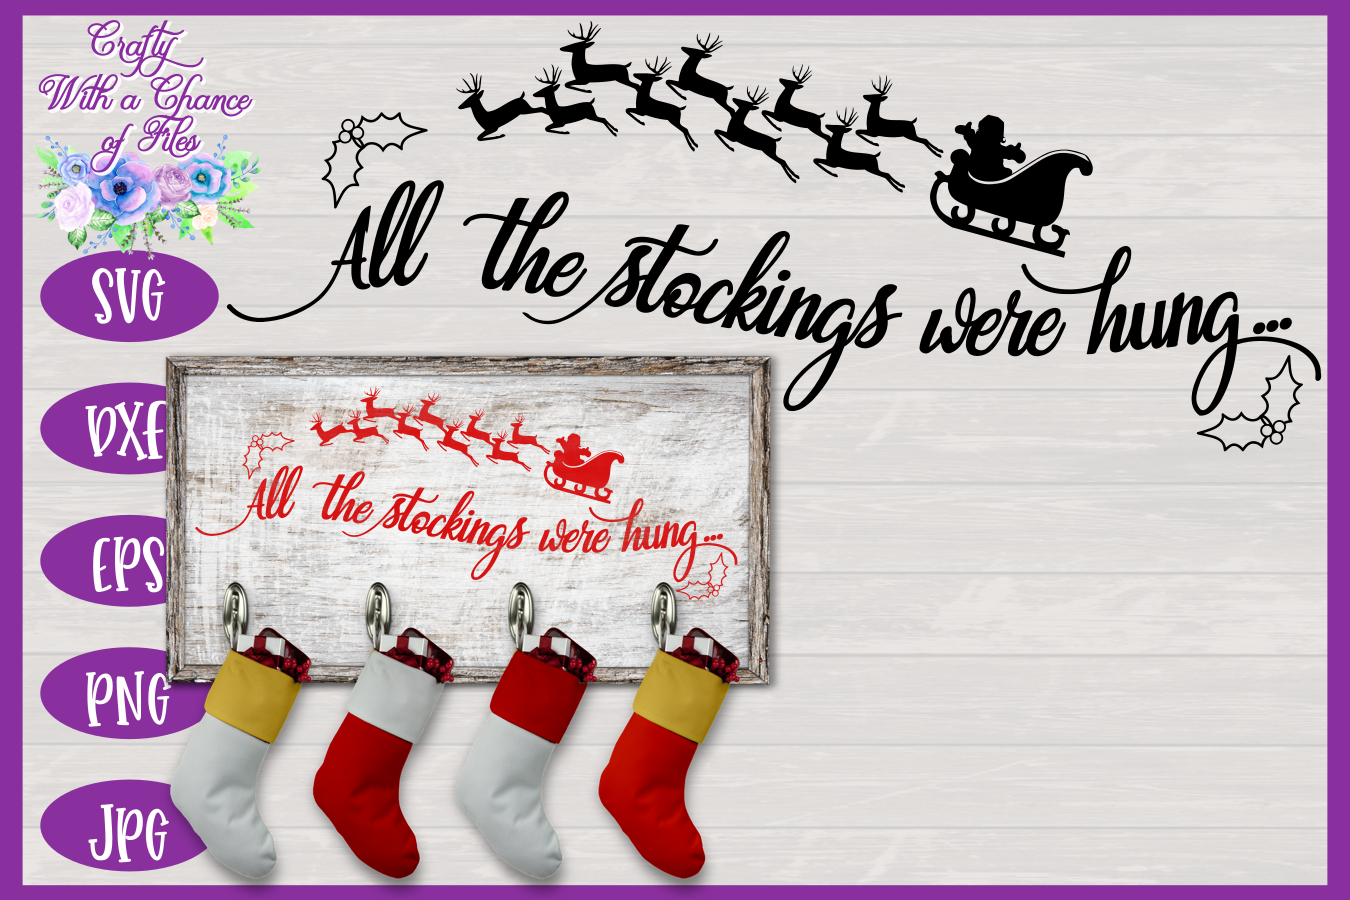 Christmas Svg All The Stockings Were Hung Svg Stocking Holder Svg By Crafty With A Chance Of Files Thehungryjpeg Com